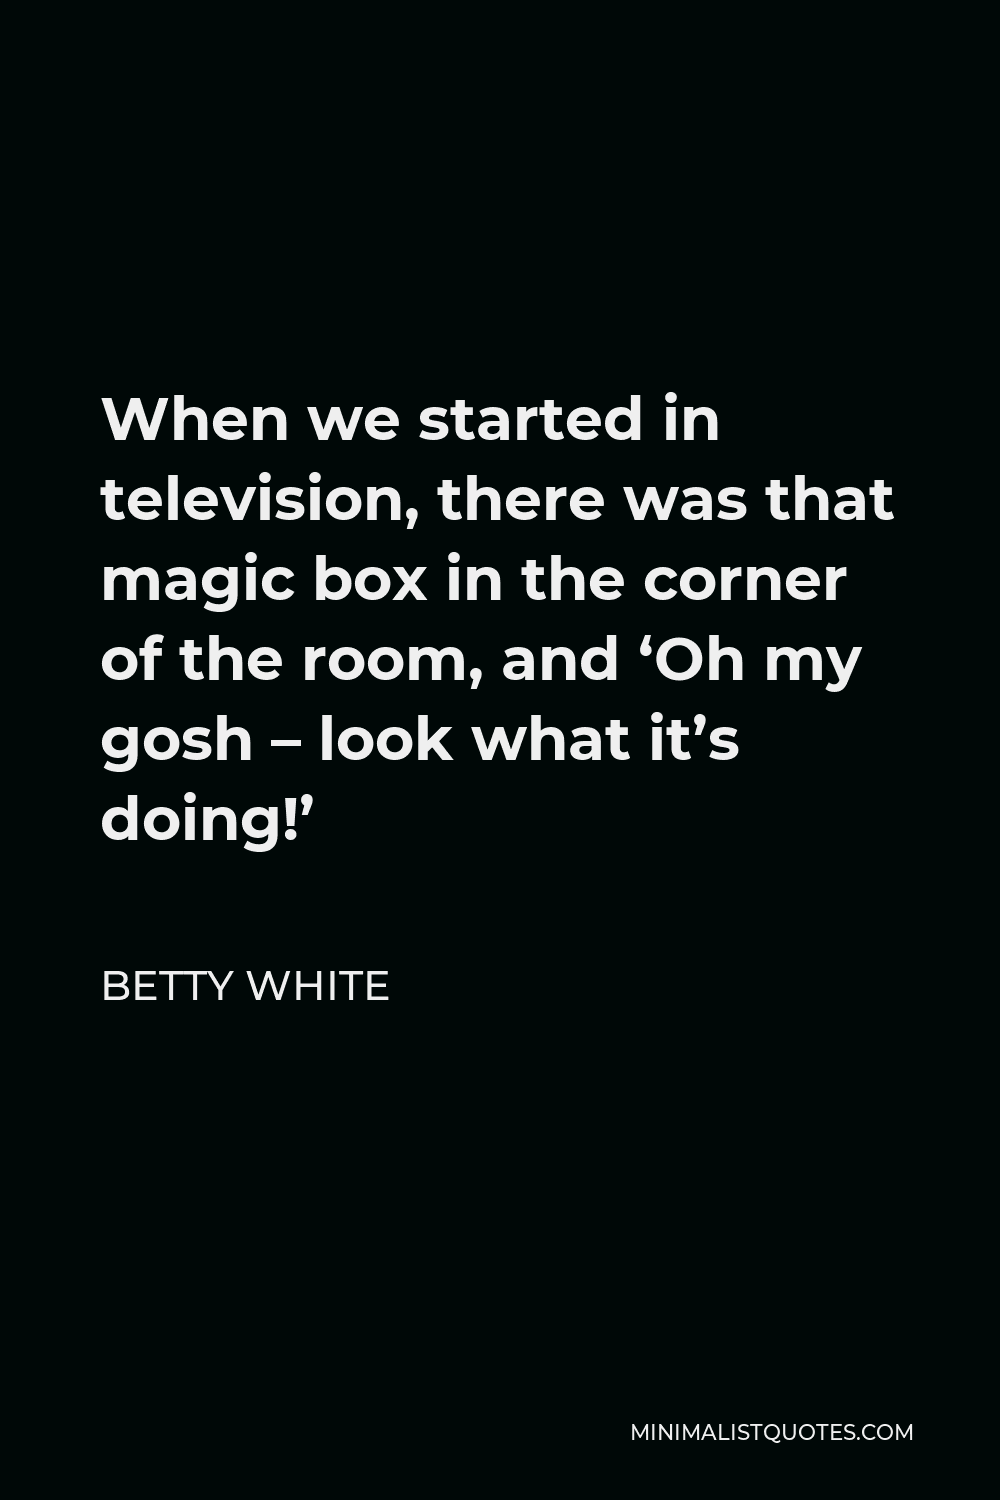 Betty White Quote - When we started in television, there was that magic box in the corner of the room, and ‘Oh my gosh – look what it’s doing!’